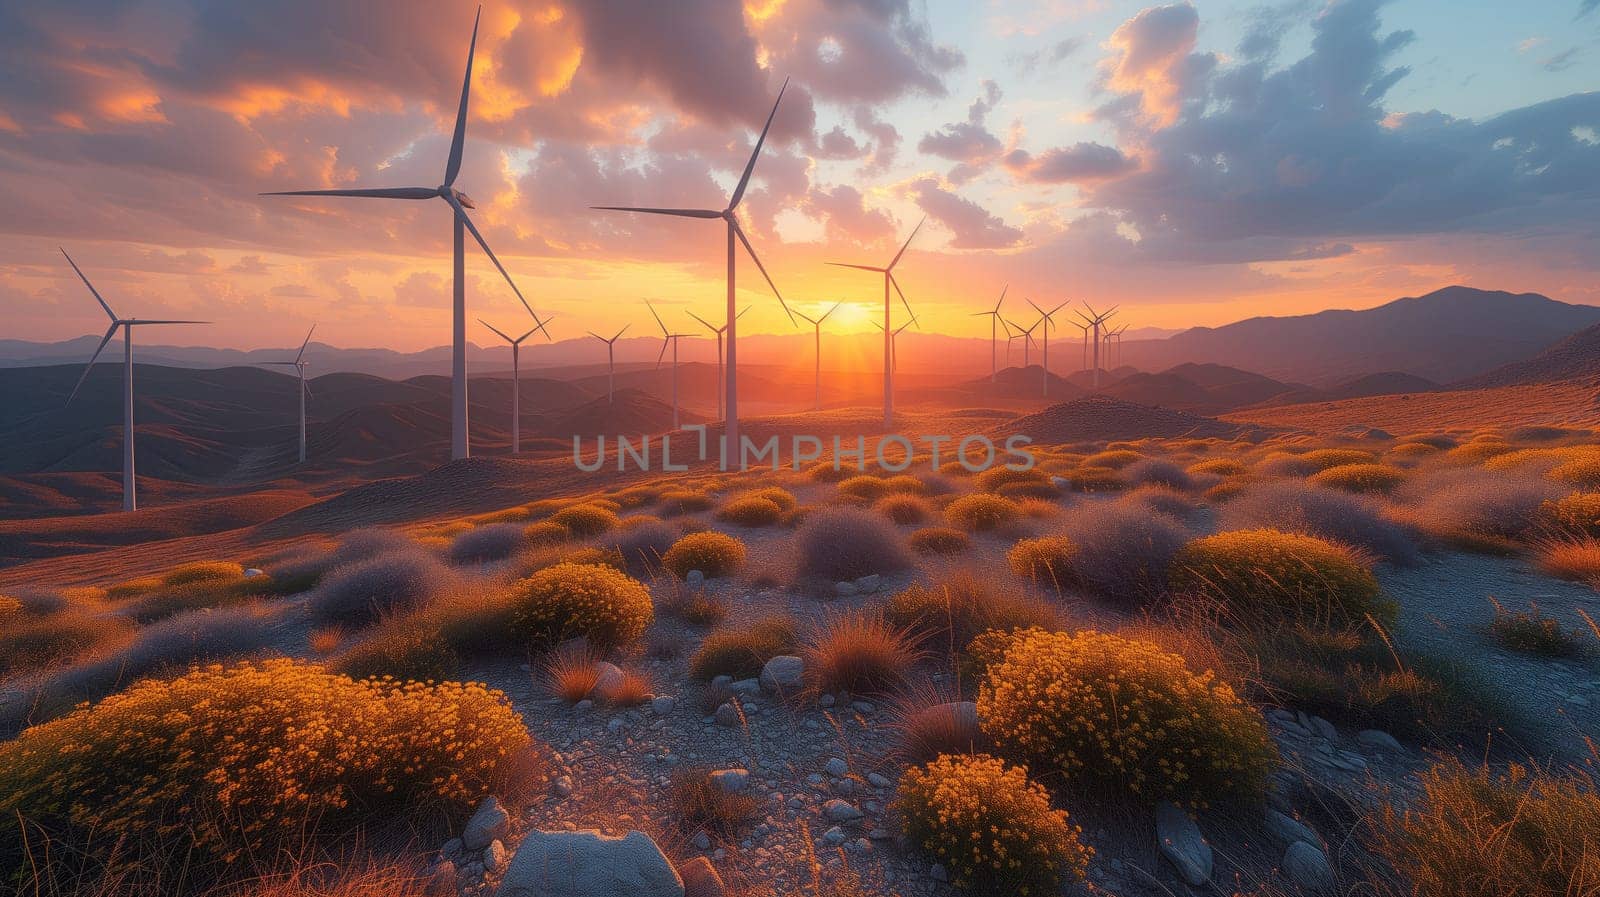 Row of wind turbines in desert at sunset, under a sky painted with hues of dusk by richwolf